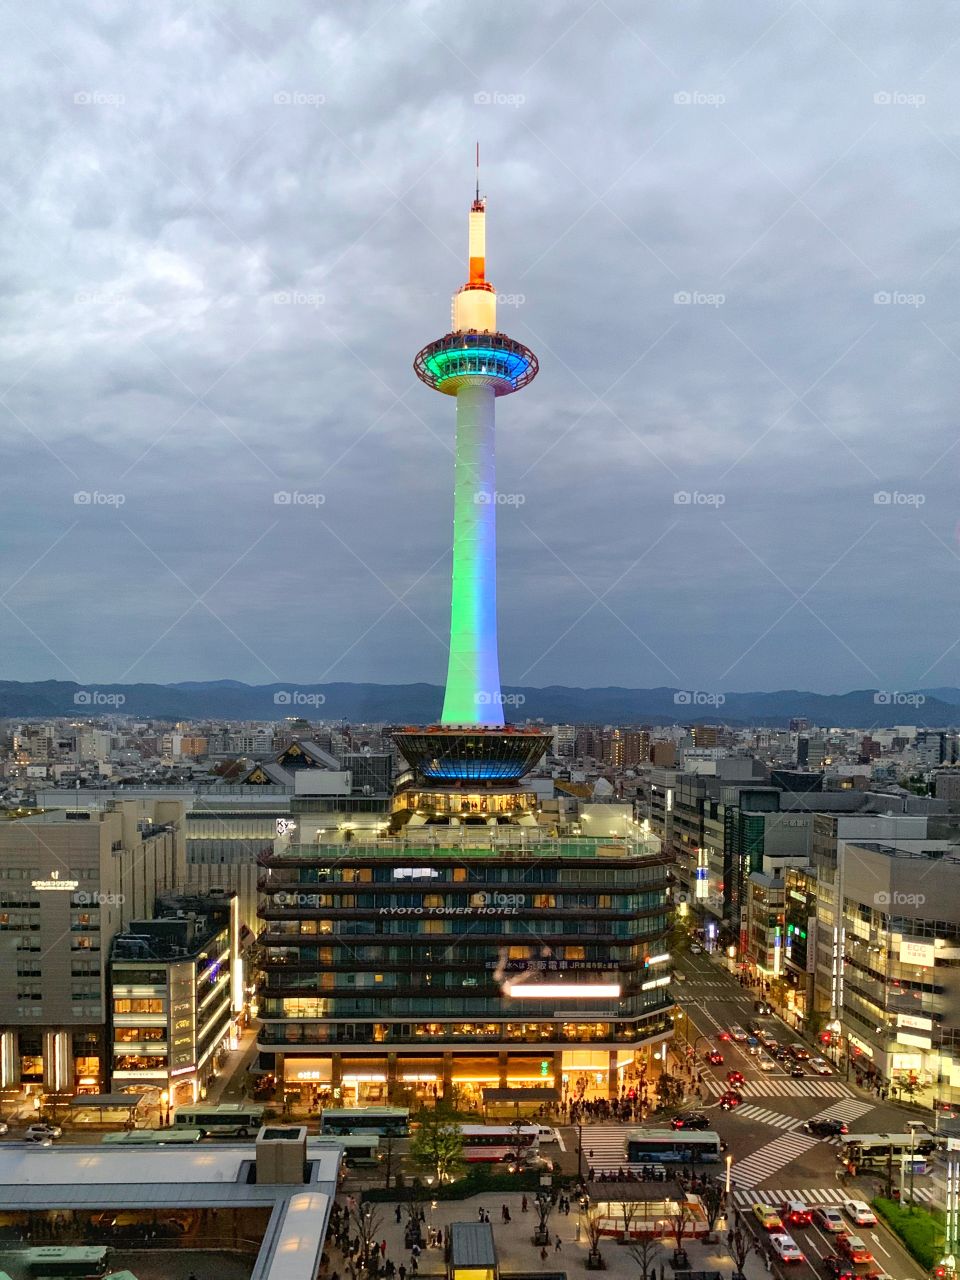 Kyoto Tower standing strong